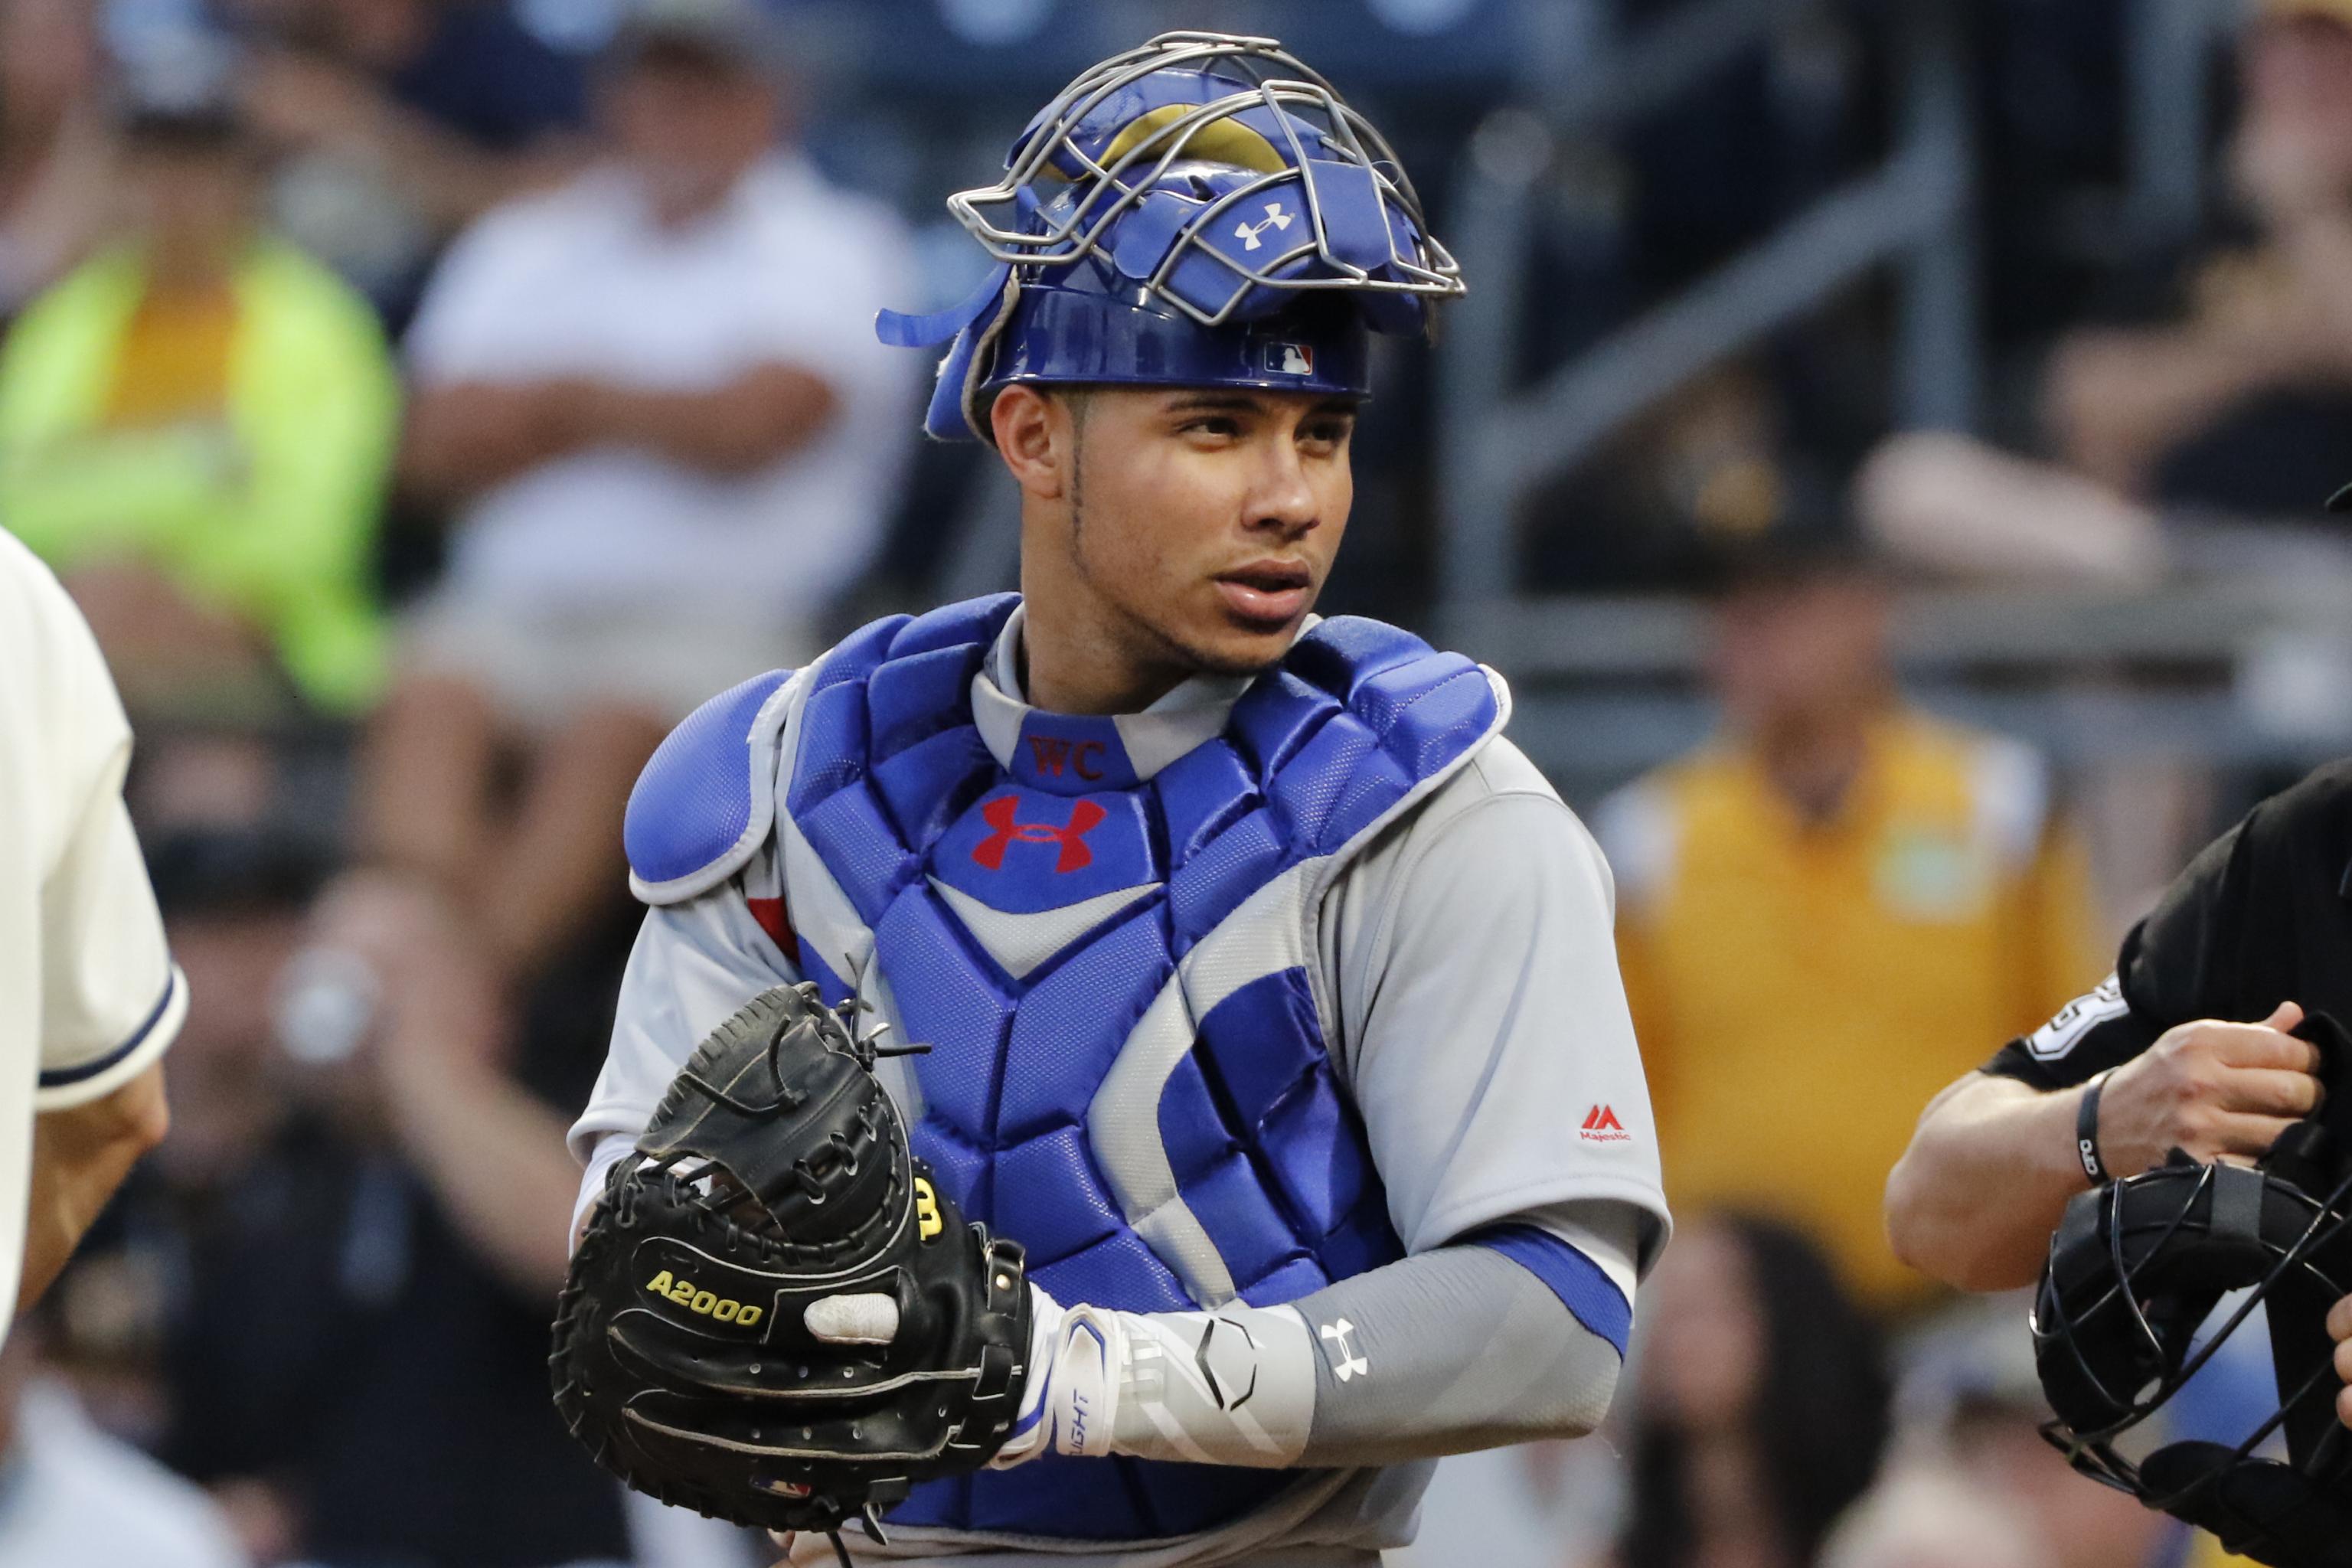 Chicago Cubs: Update on the Willson Contreras hamstring injury